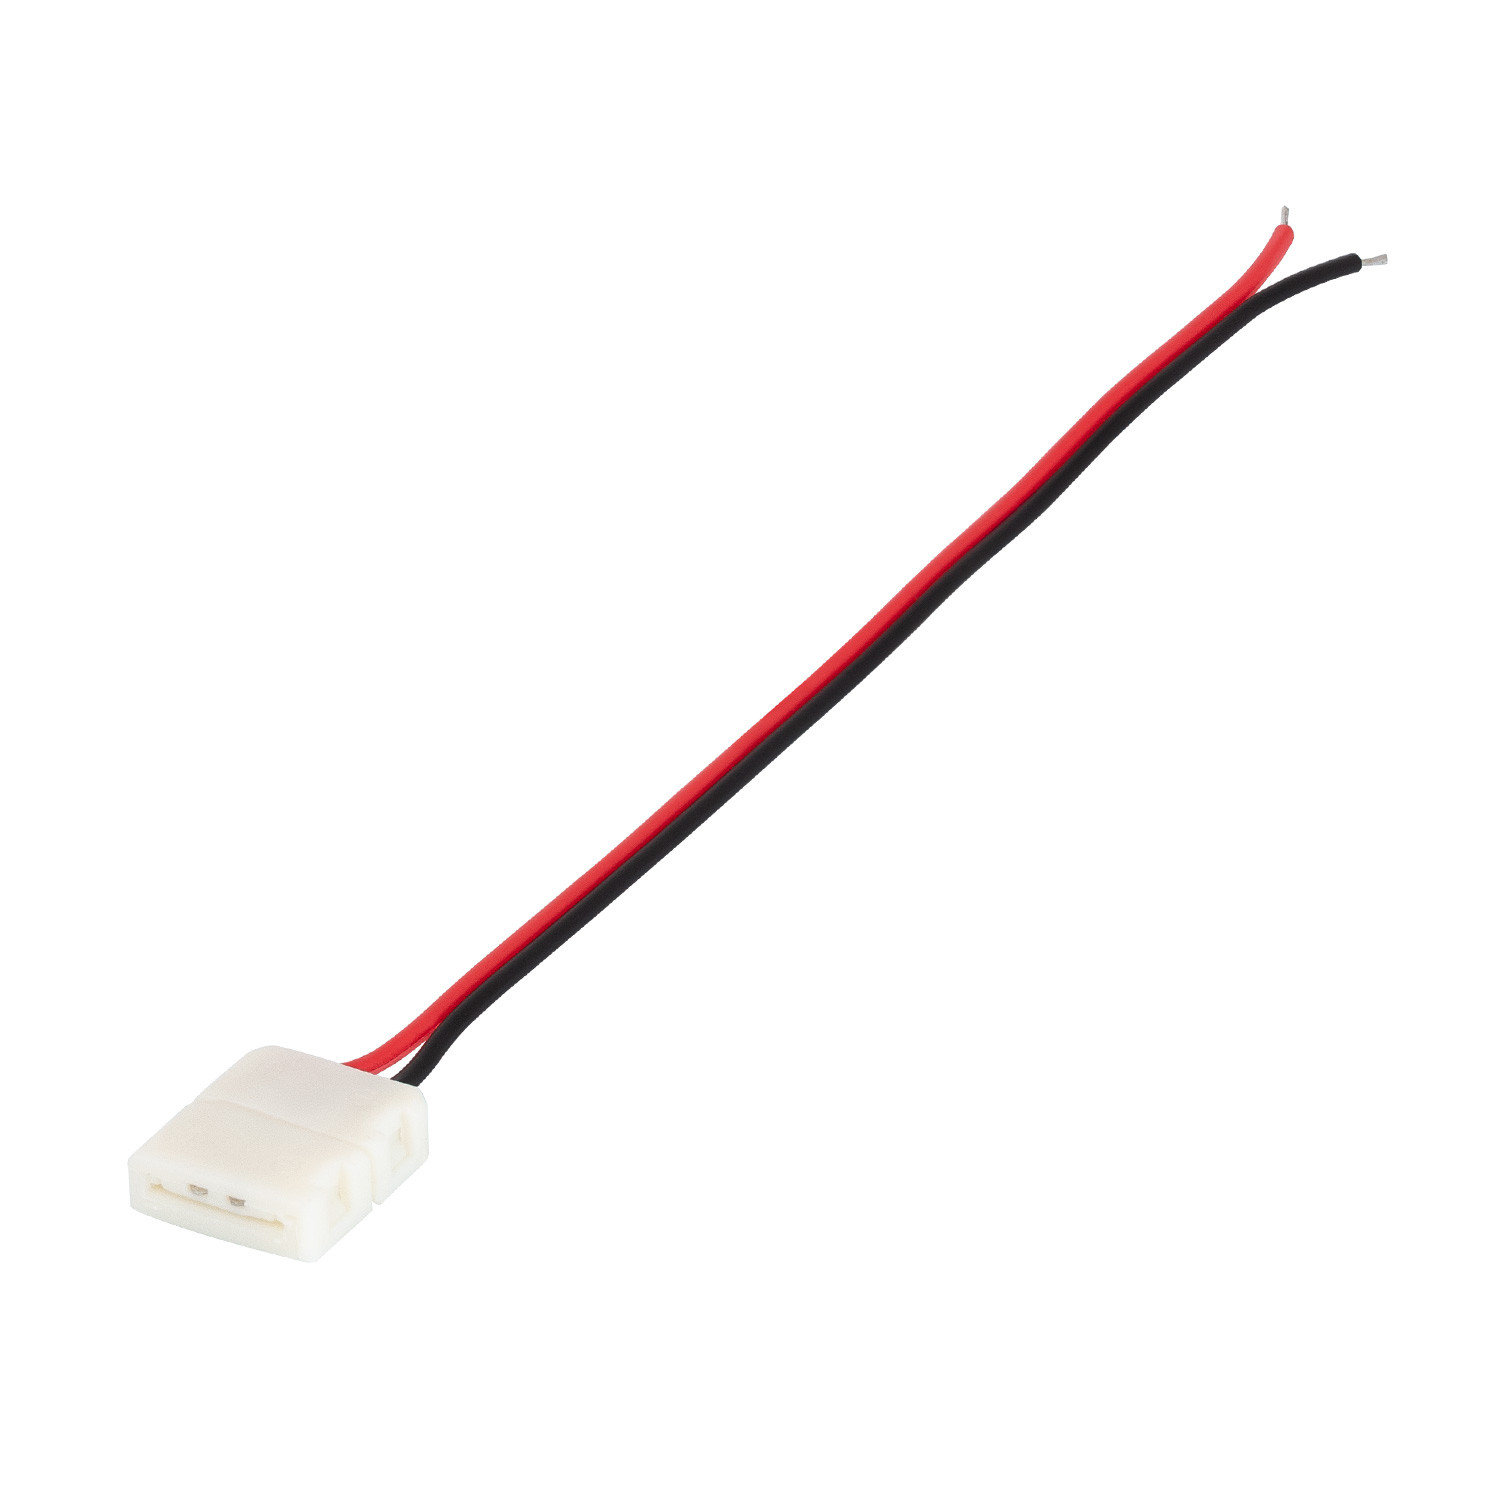 Product of 2 PIN 10mm Connector Cable for Monochrome LED Strips (12V)